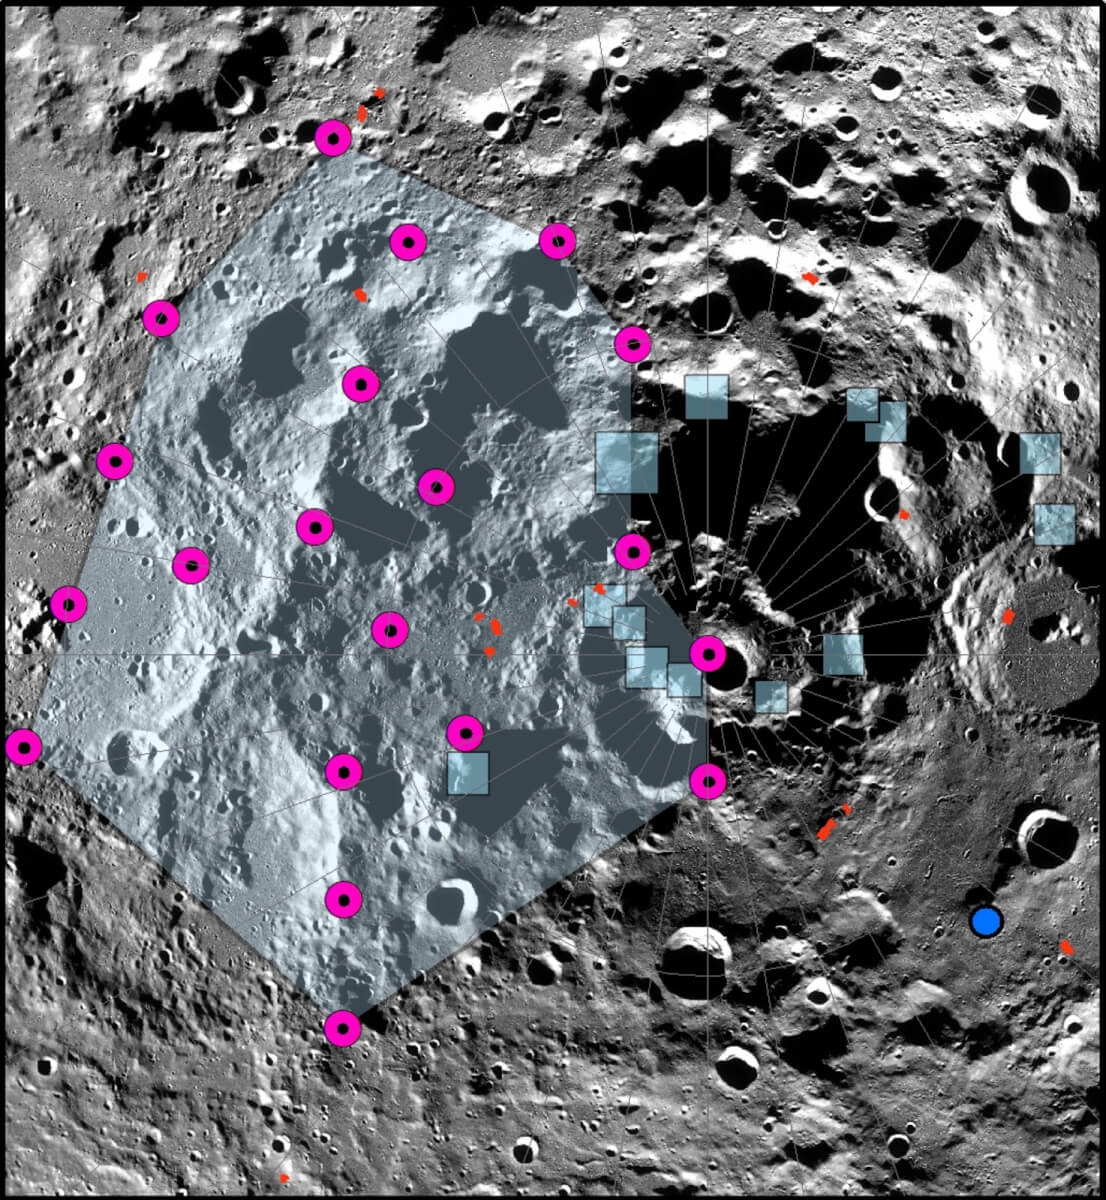 The epicenter of one of the strongest moonquakes recorded by the Apollo Passive Seismic Experiment was located in the lunar south polar region